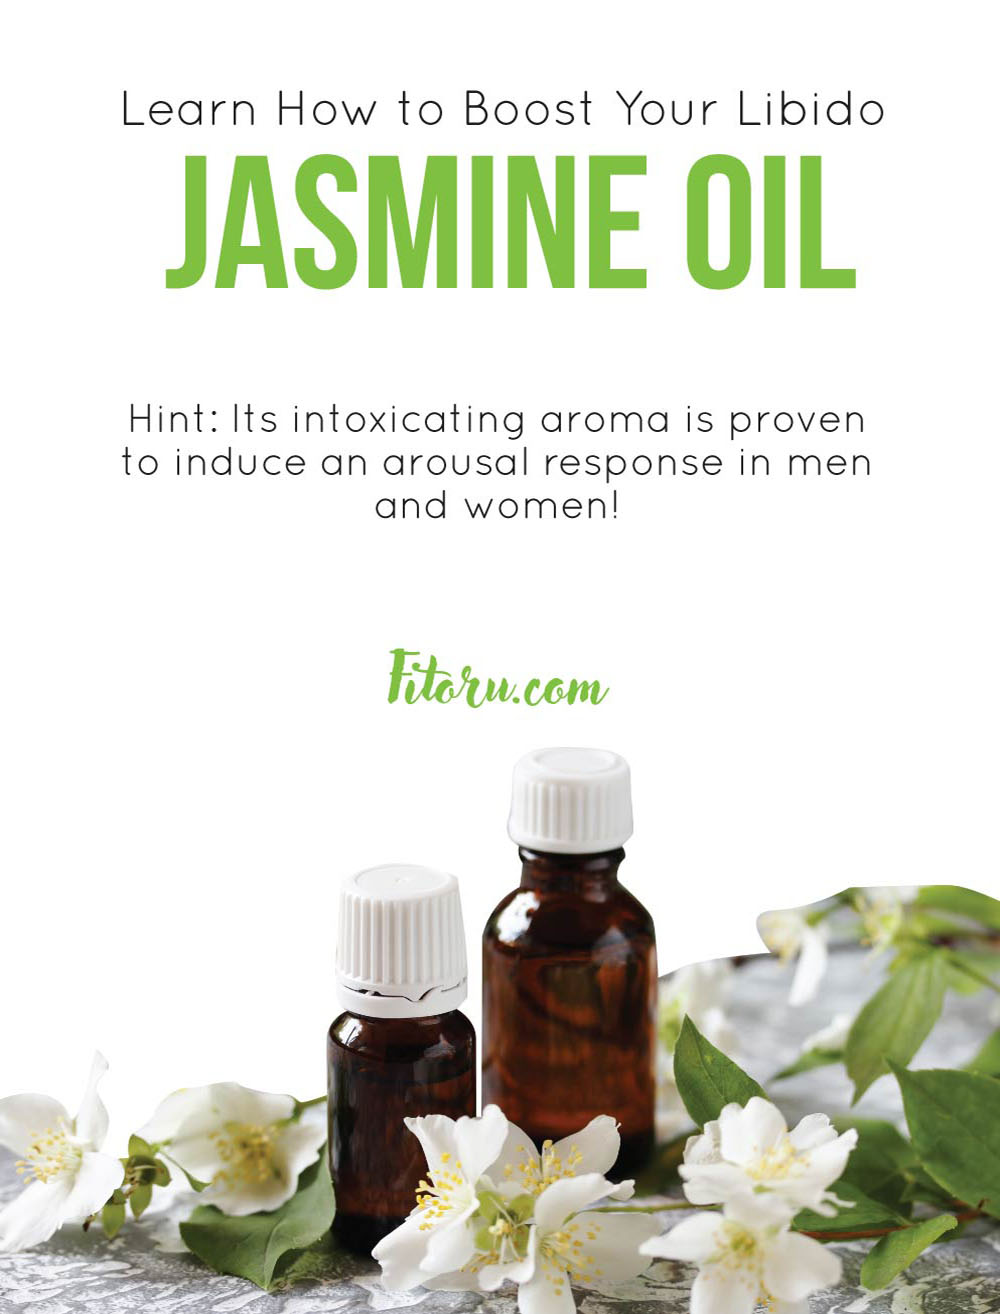 Learn How to Boost Your Libido with Jasmine Oil